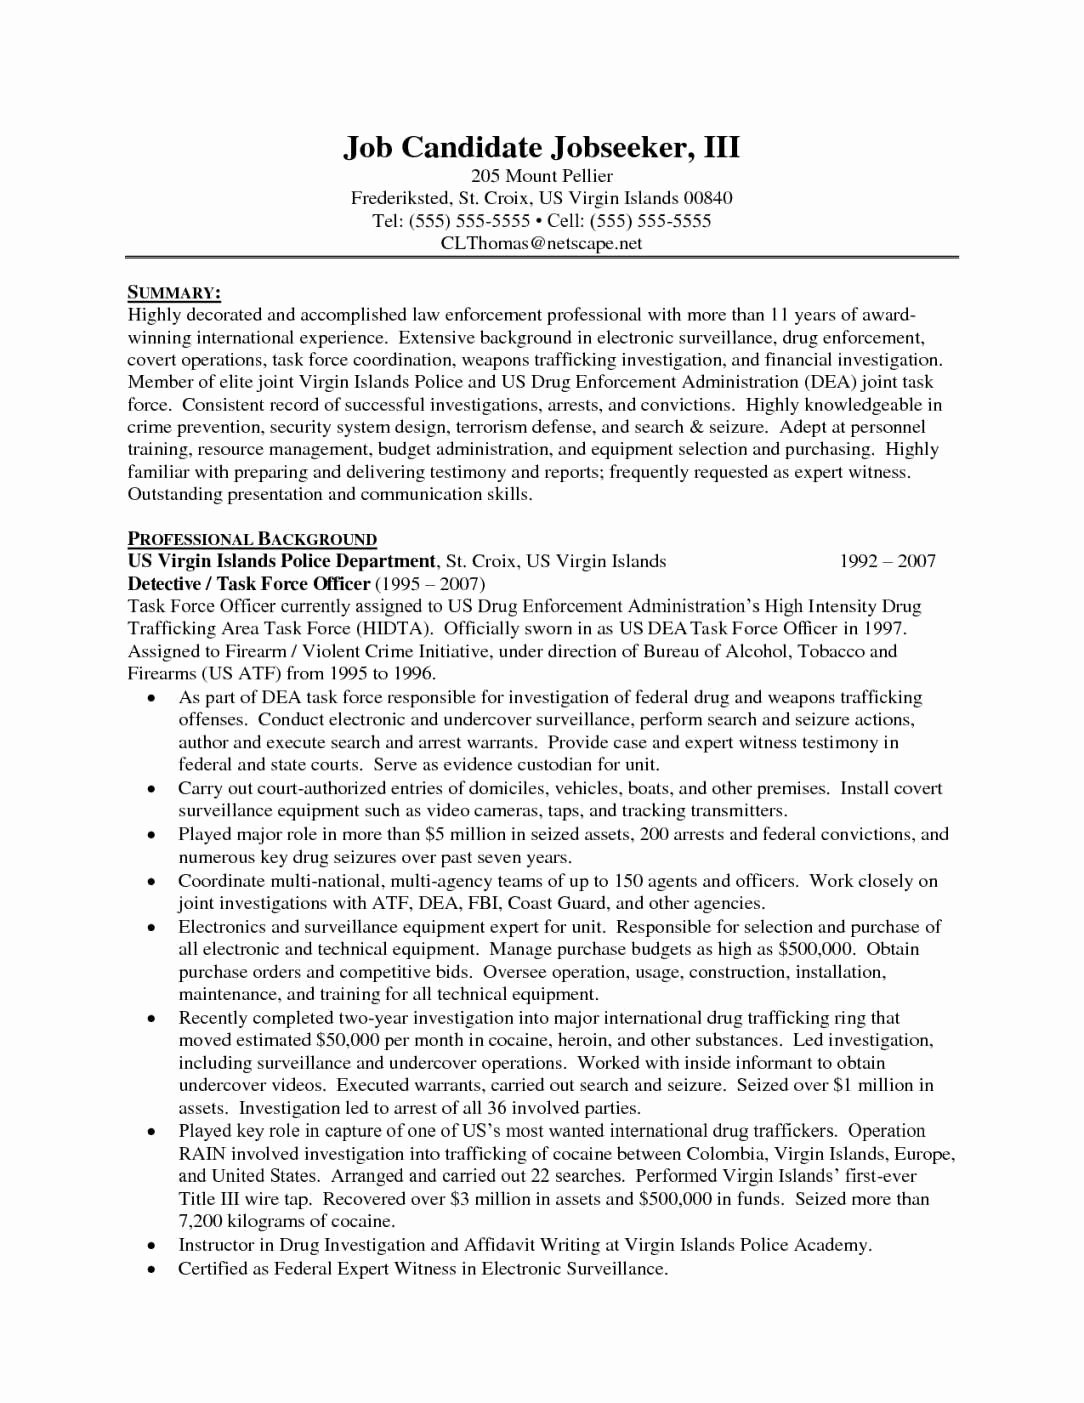 Resume Objective for Law Enforcement Sample Law